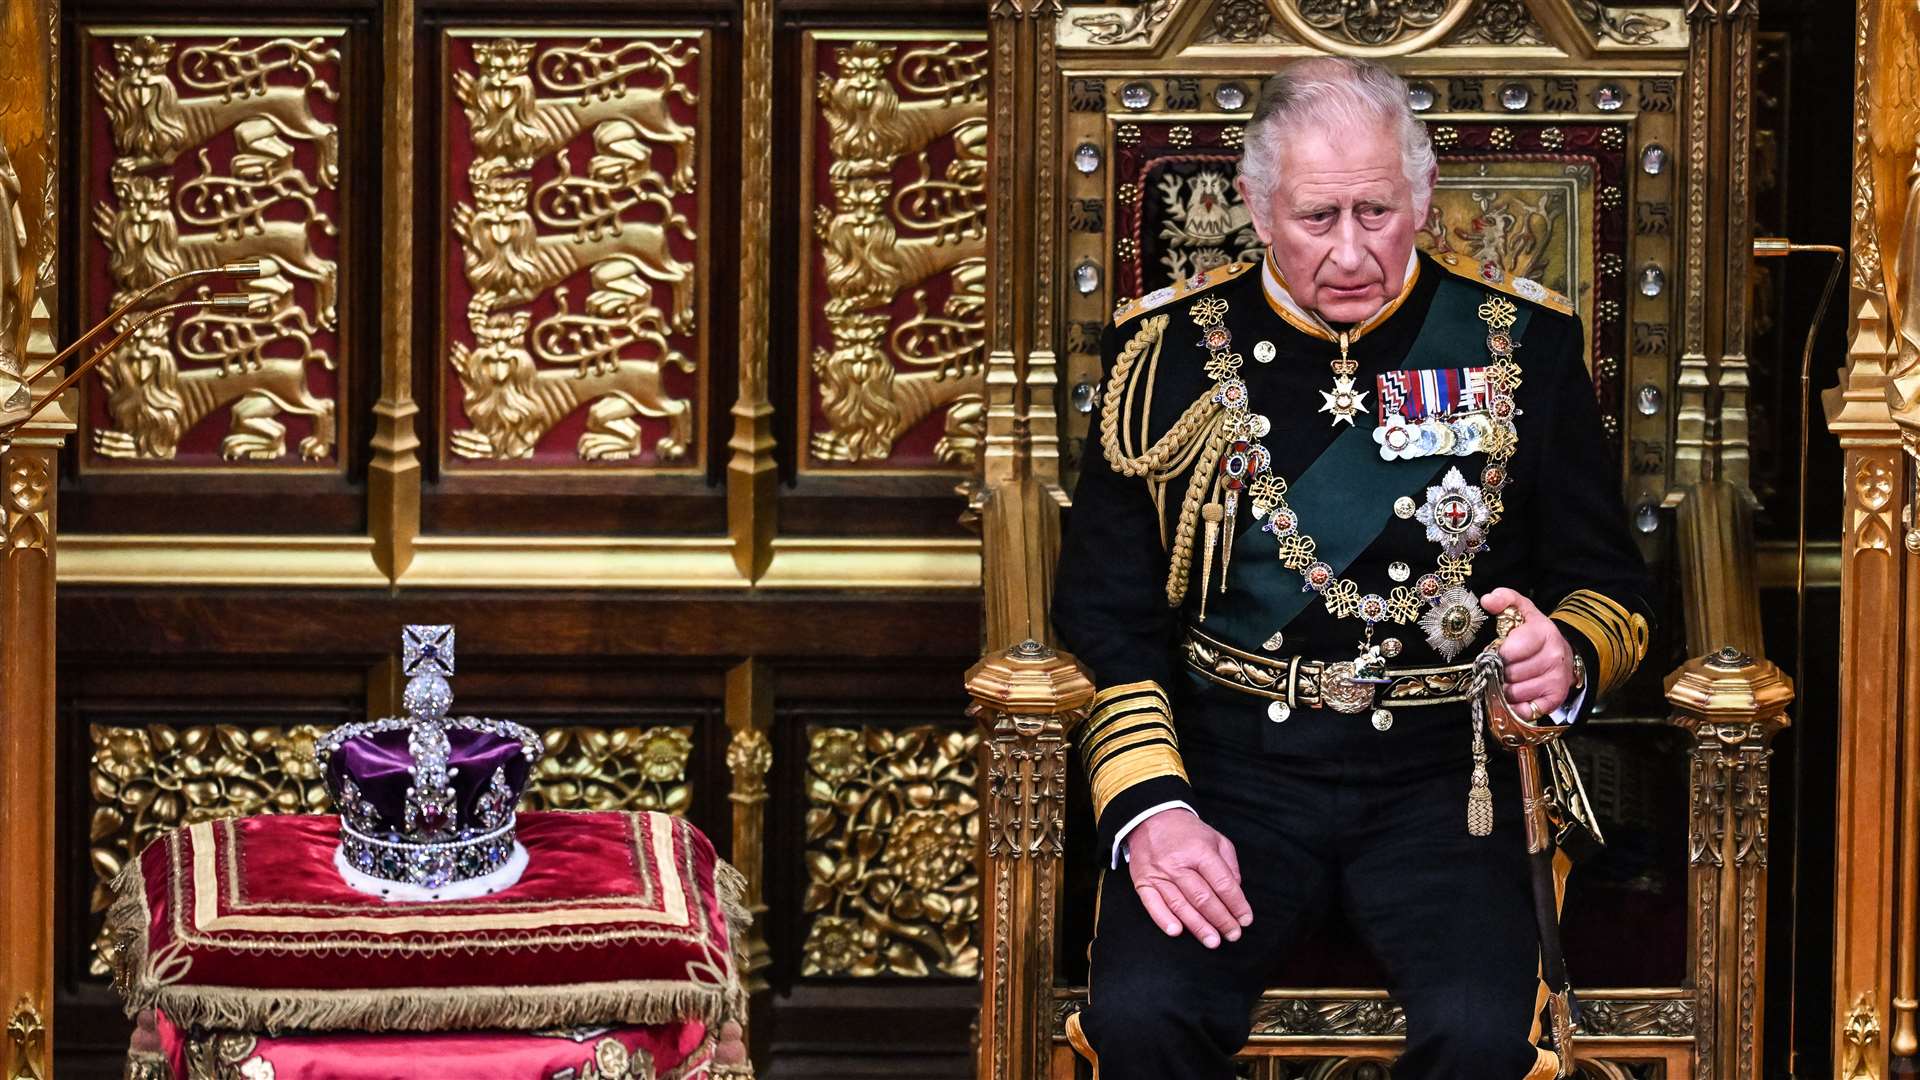 The Prince of Wales sits by the Imperial State Crown during the State Opening of Parliament in the House of Lords (Ben Stansall/PA)